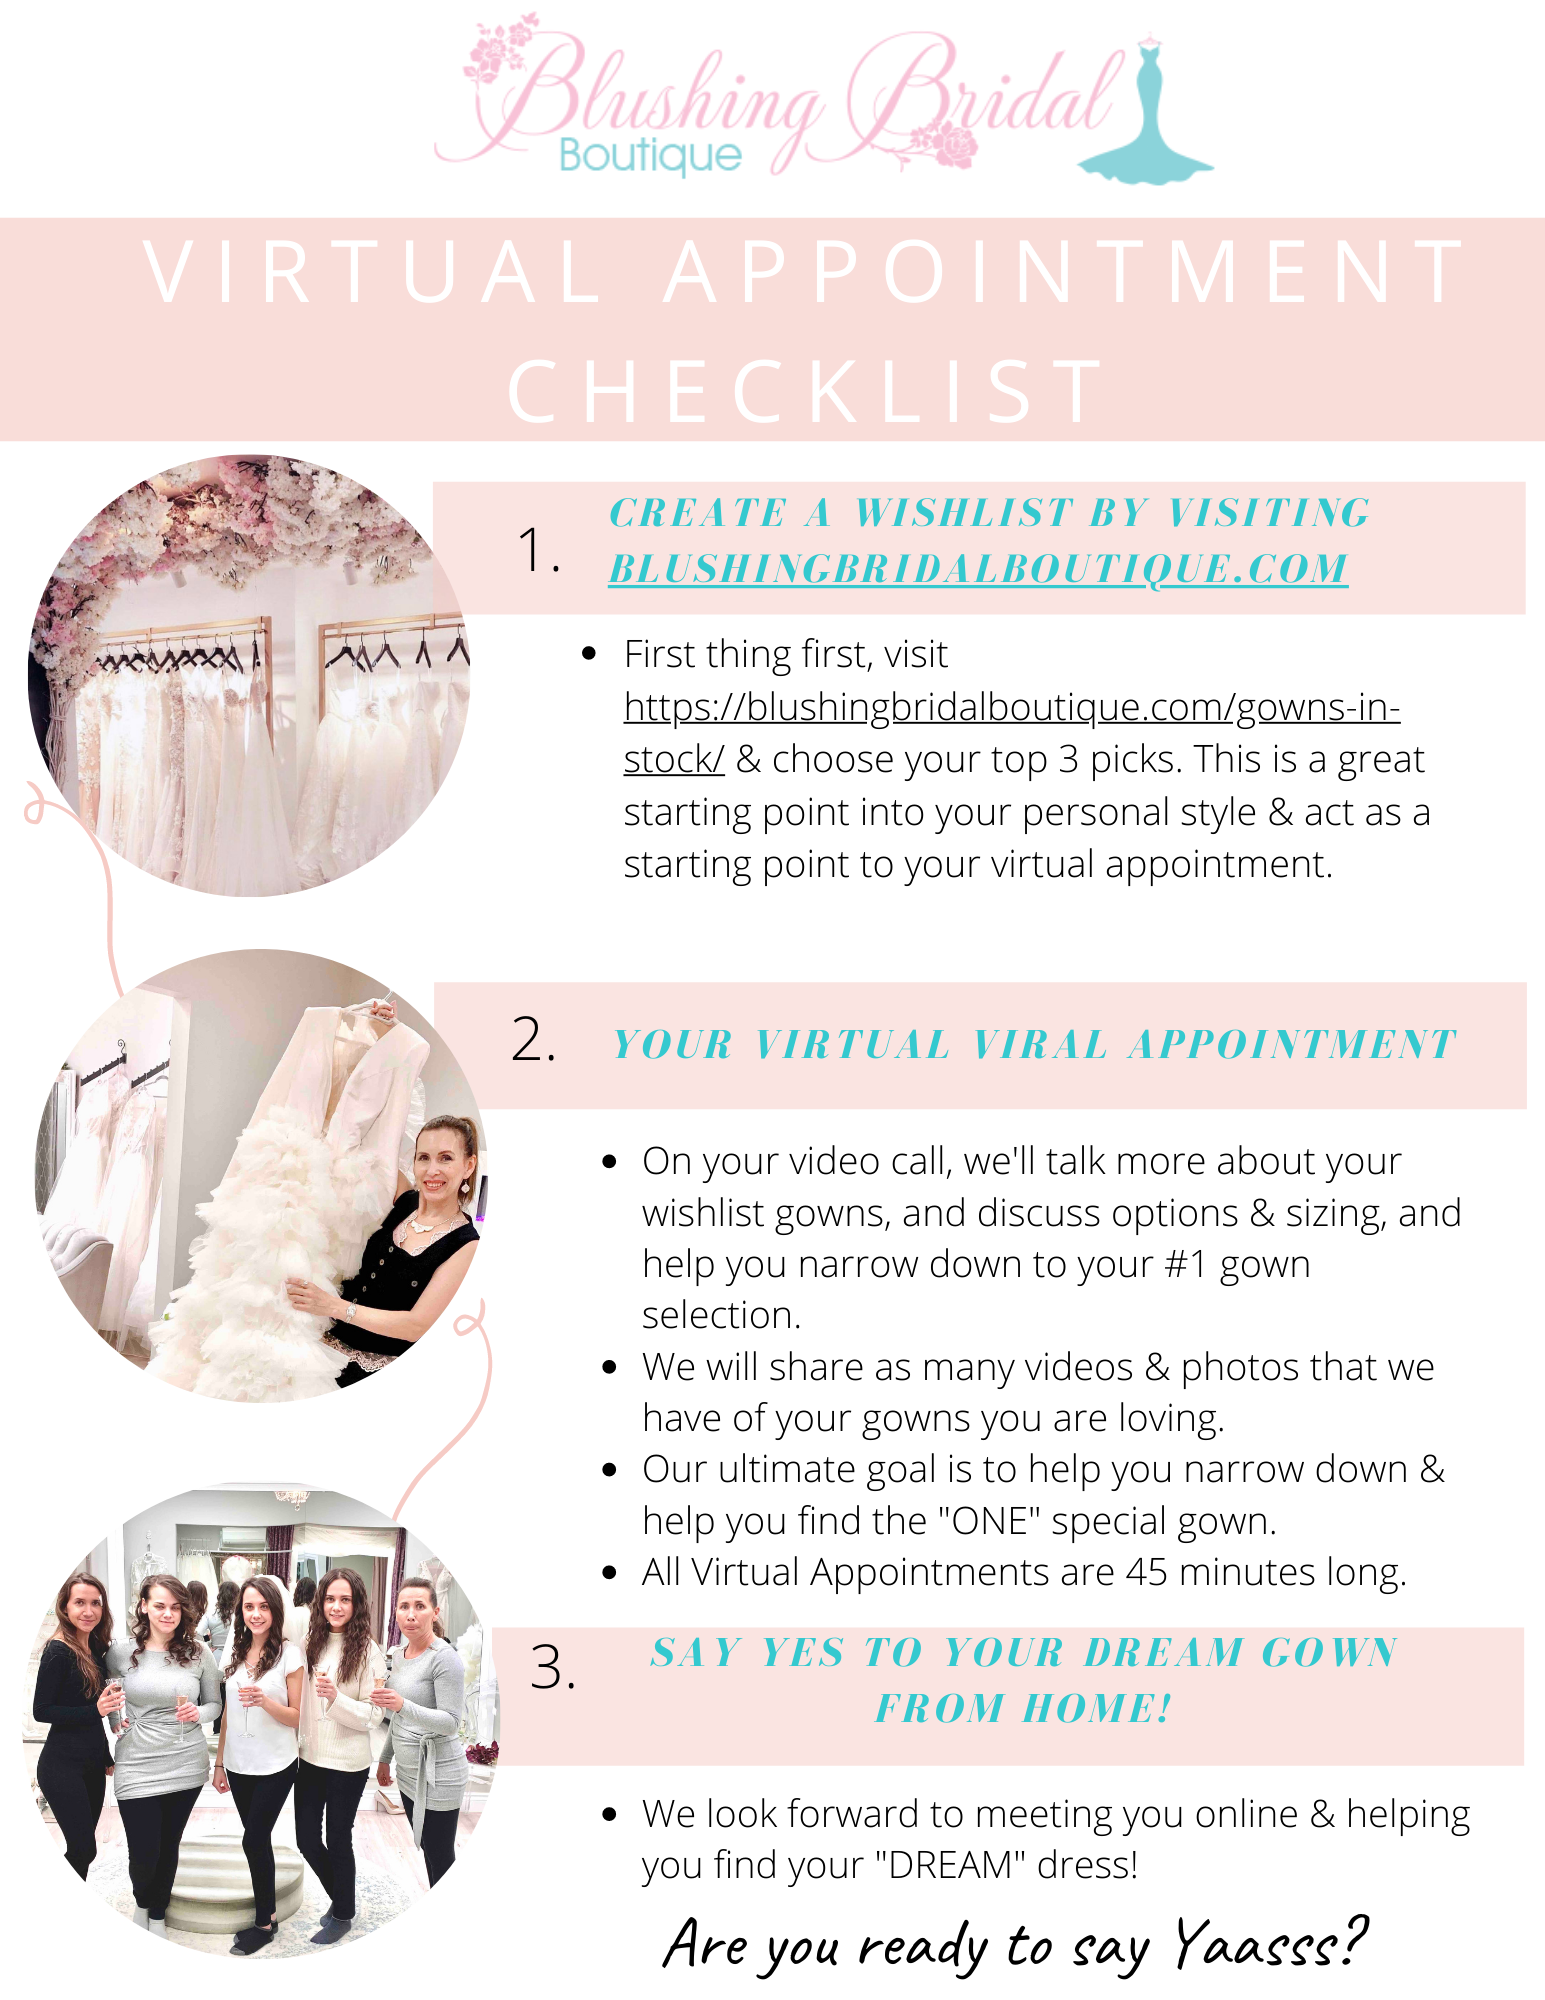 Blushing Bridal Boutique Virtual Appointments